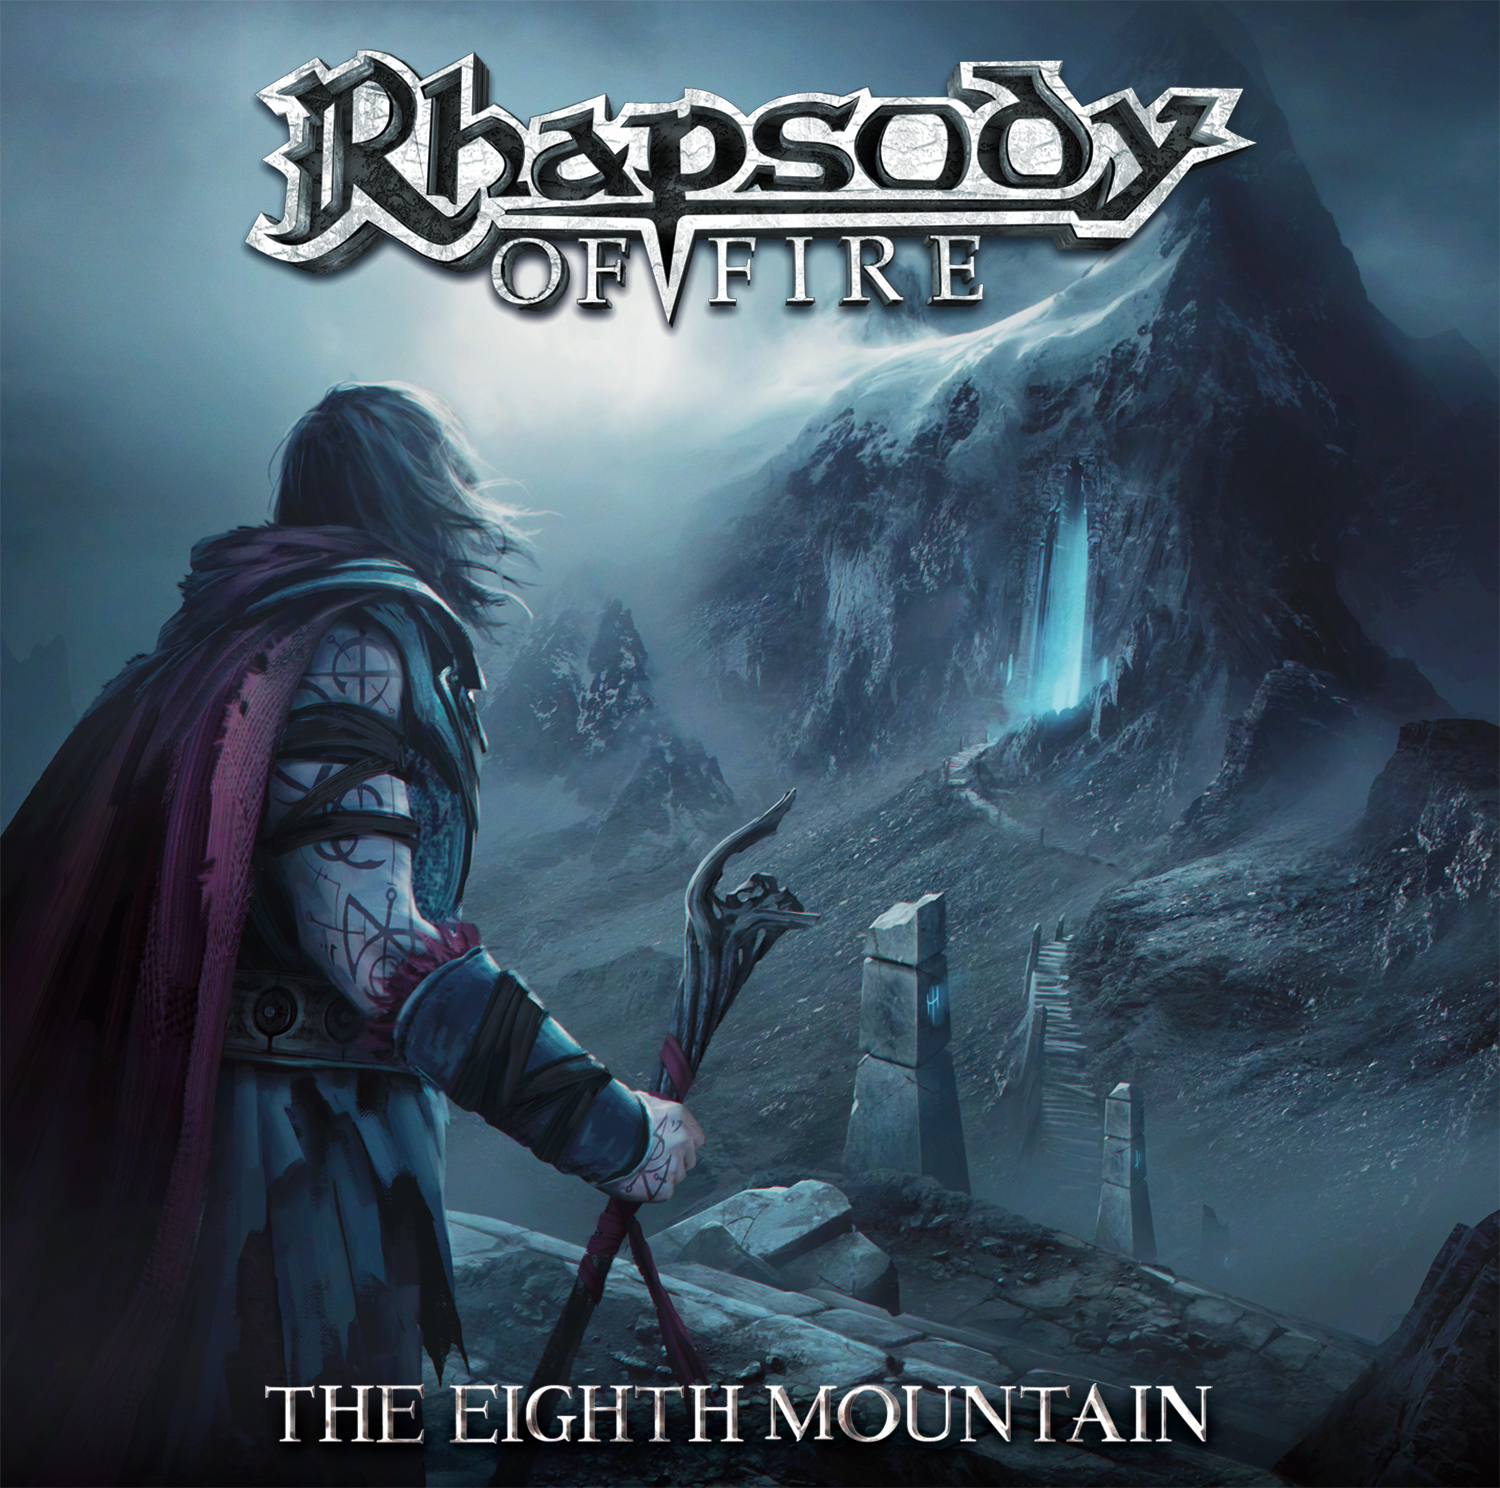 Rhapsody of Fire's "The Eighth Mountain"